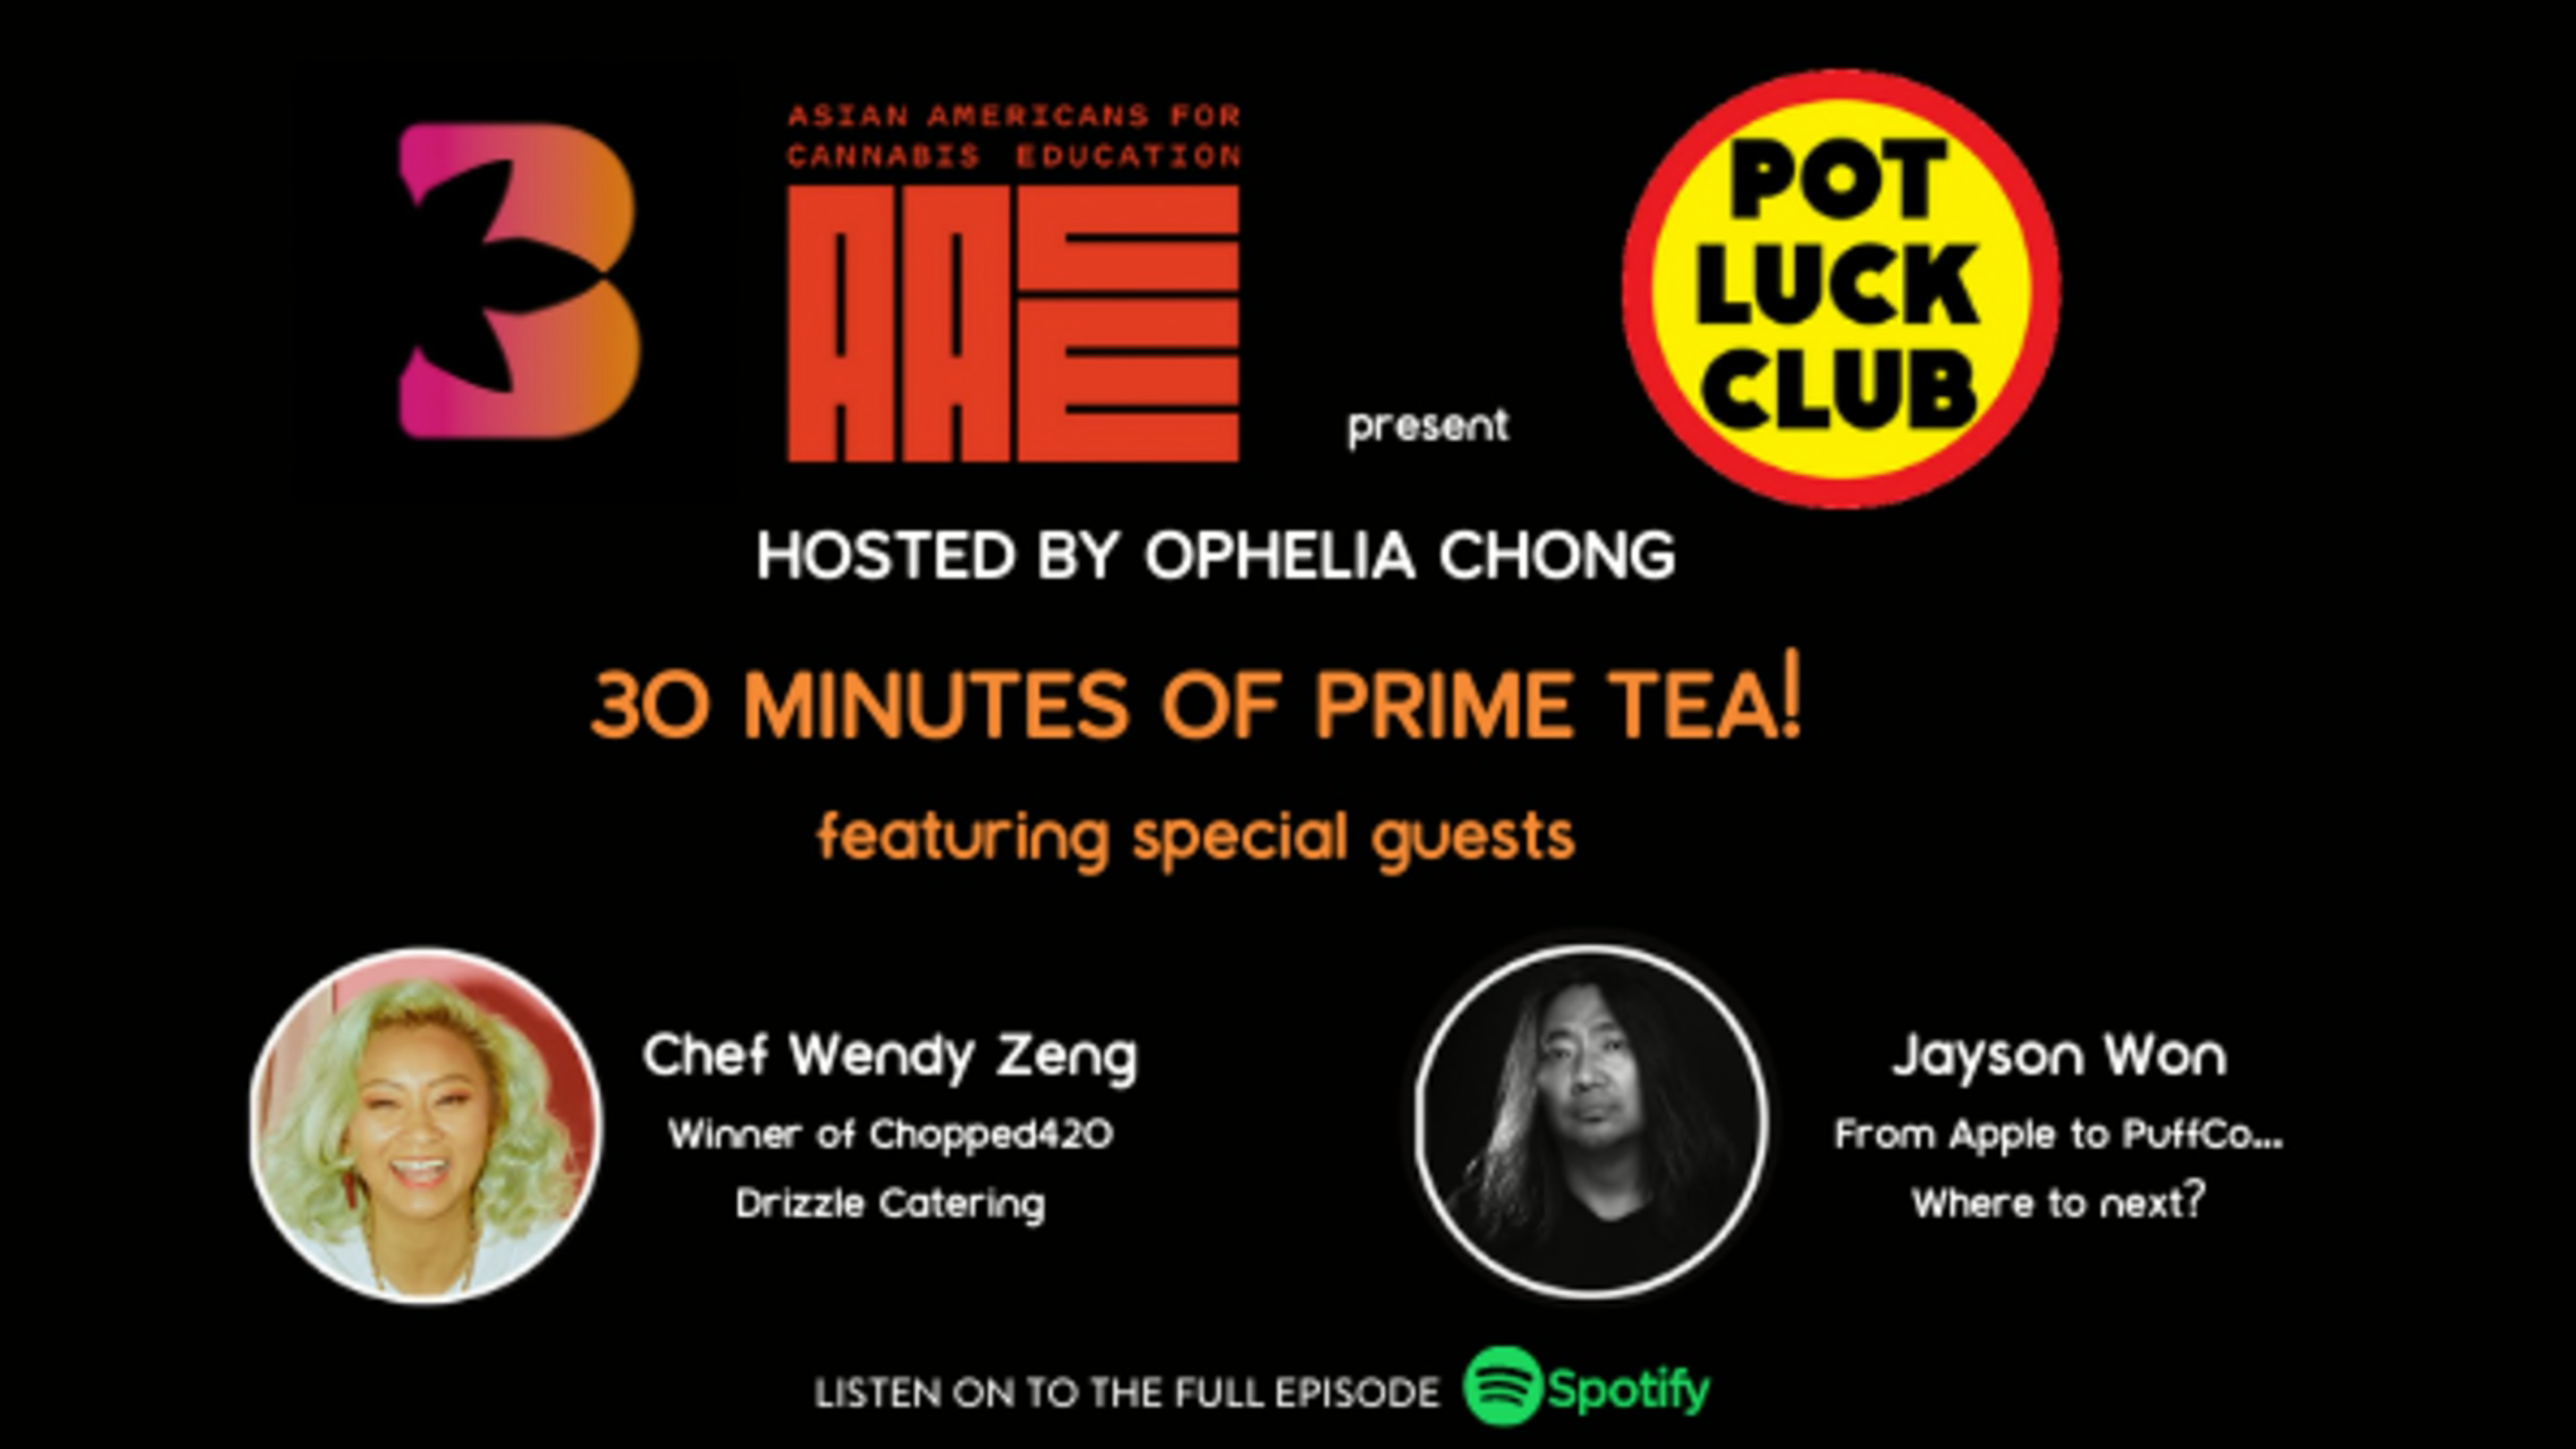 New Podcast! Listen to the first episode of Pot Luck Club hosted by Ophelia Chong.